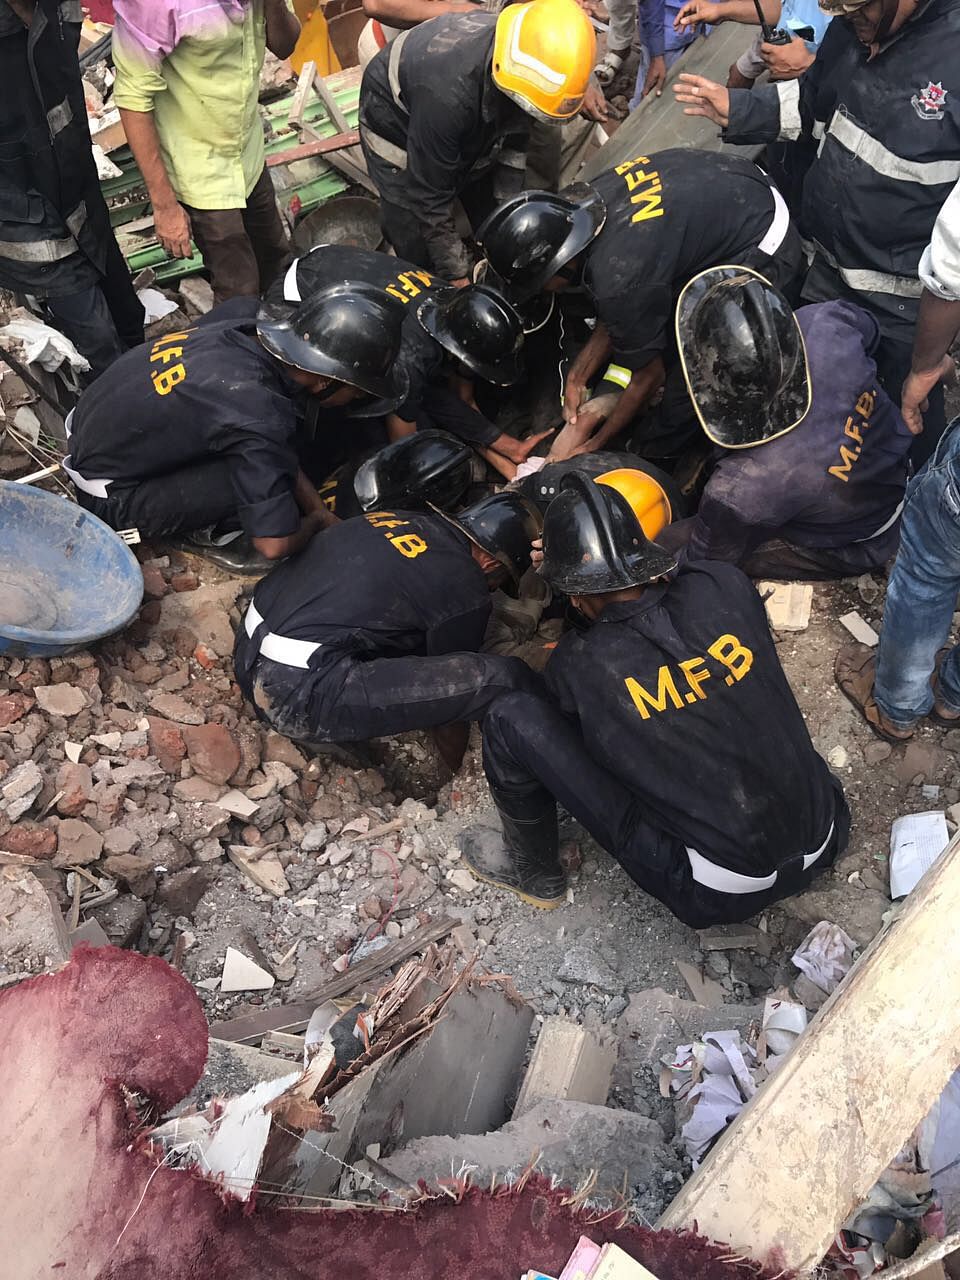 

The collapse of a five-story residential building in Mumbai’s Bhendi Bazar area has left at least 12 people dead.